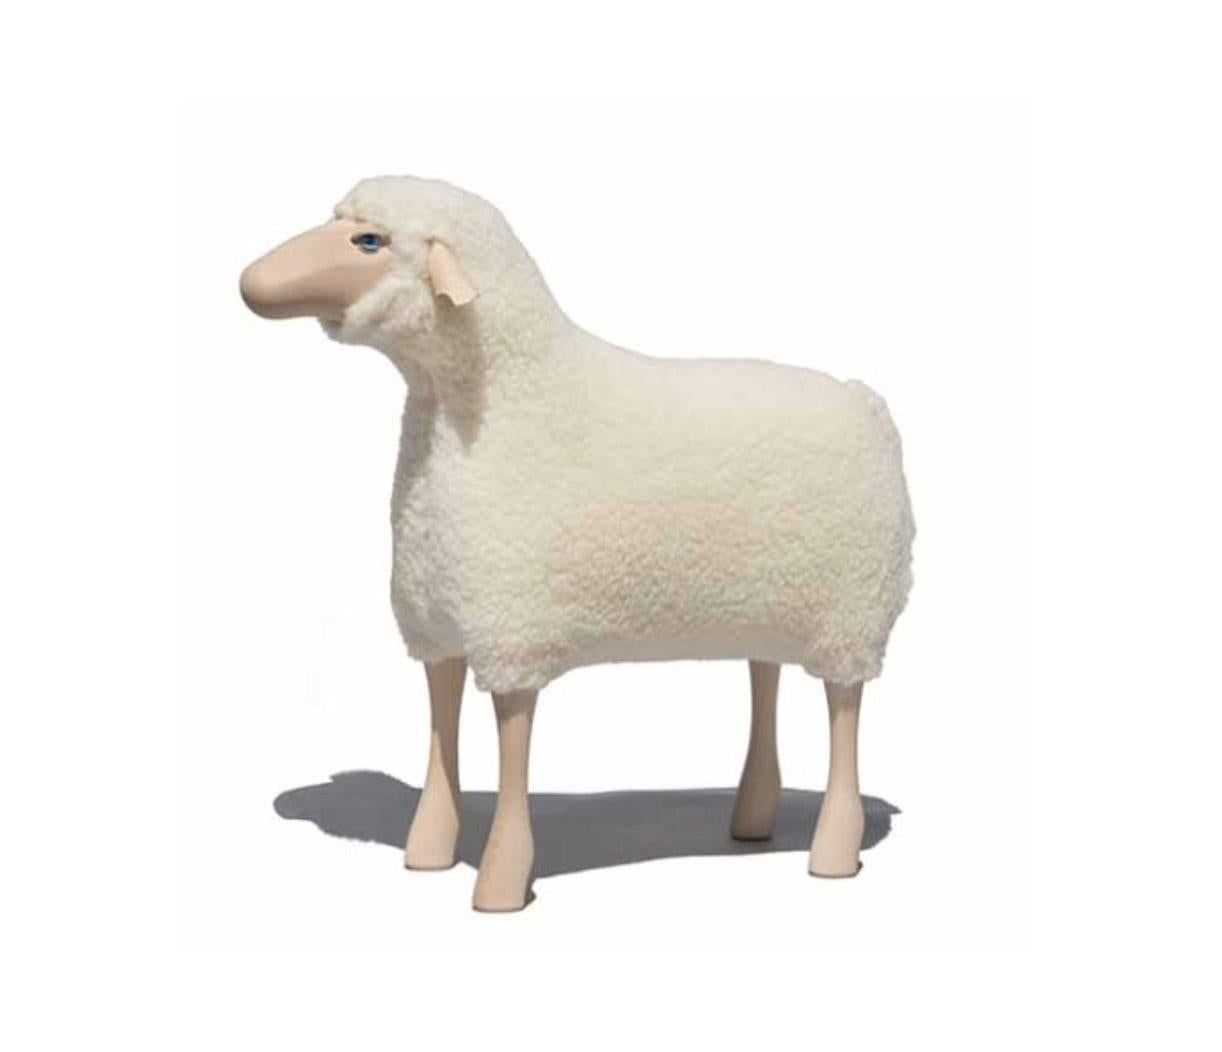 Sheep, white wool plush, beech wood

Created by Hans-Peter KRAFFT in 1982 and handmade in Germany.  This sheep is designed as a piece of furniture and is strong enough to be used as a stool by adults and children.  Materials: Wool, beech, leather